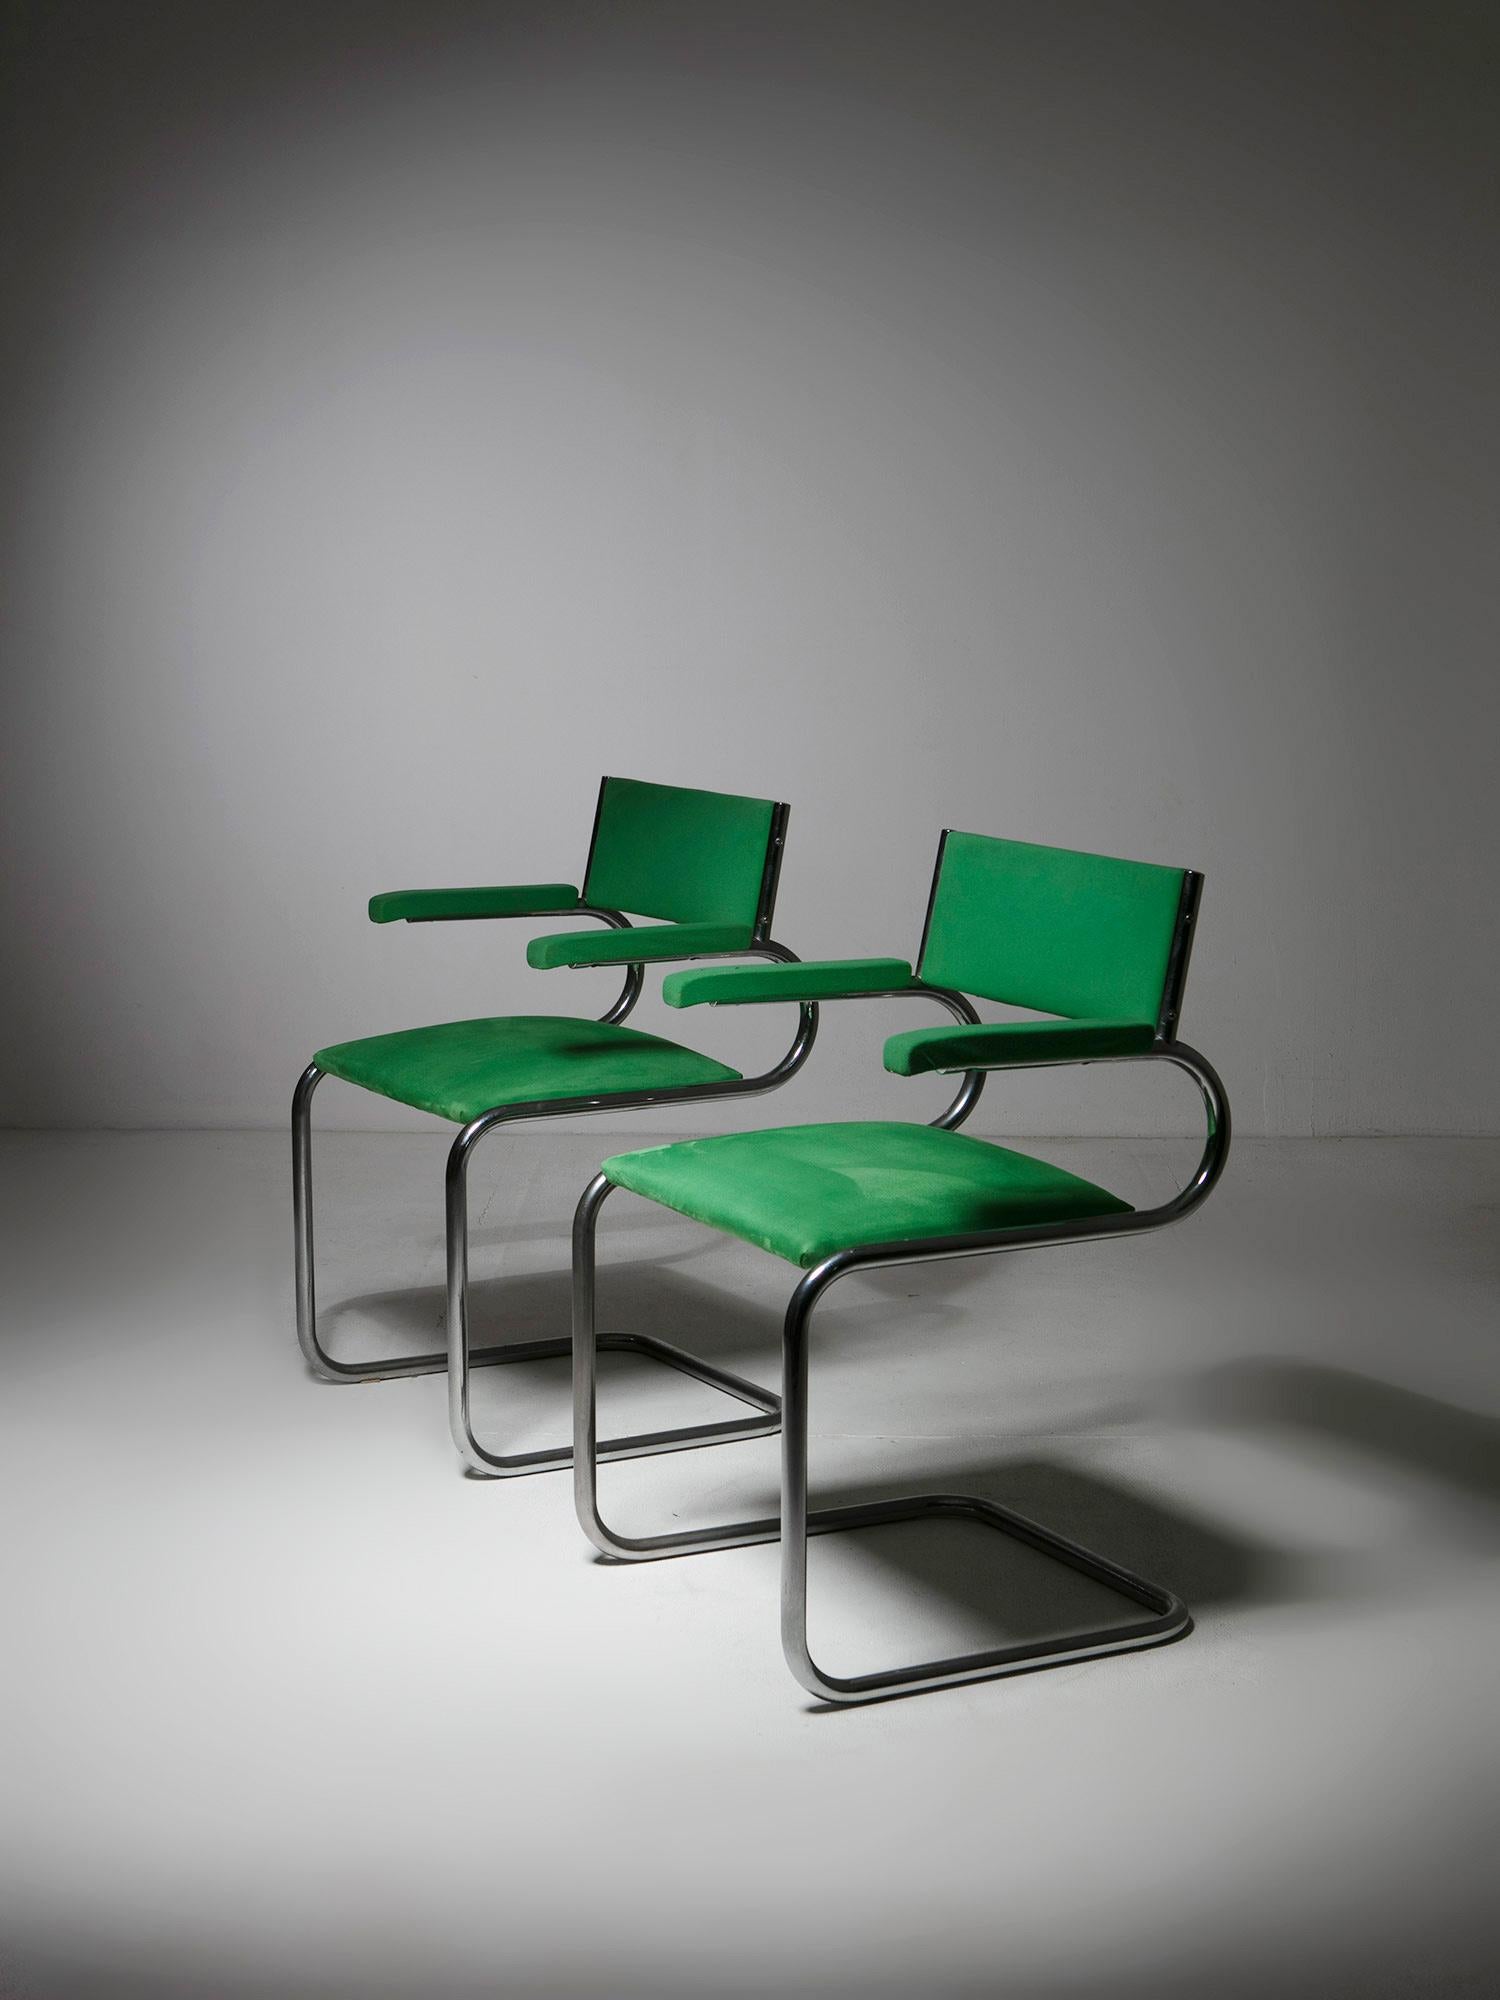 Set of two Mara lean armchairs by Luigi Saccardo for Arrmet.
Low backrest and thin armrests on an iconic tubular shape.